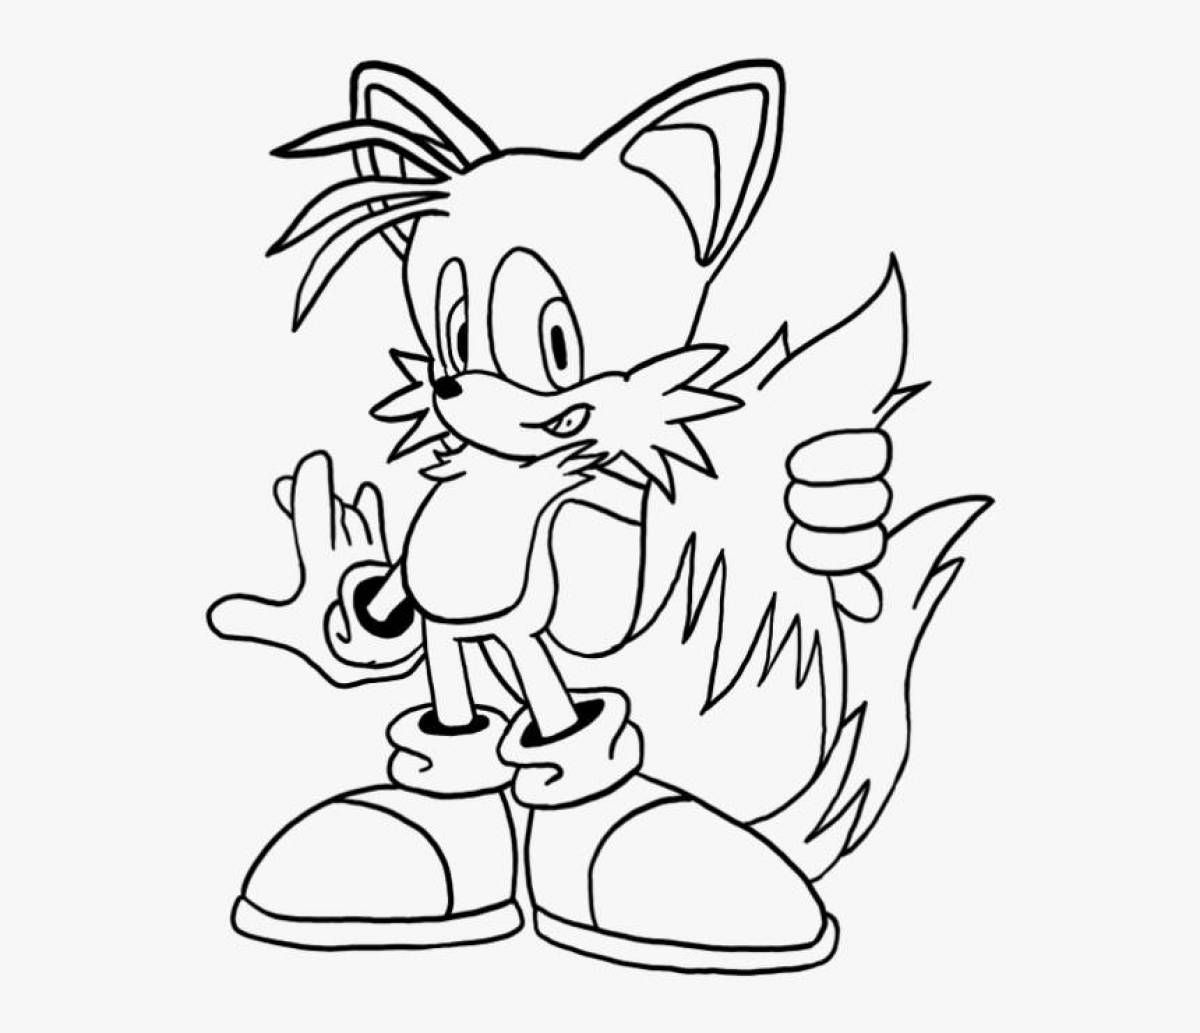 Innovative sonic coloring book for kids